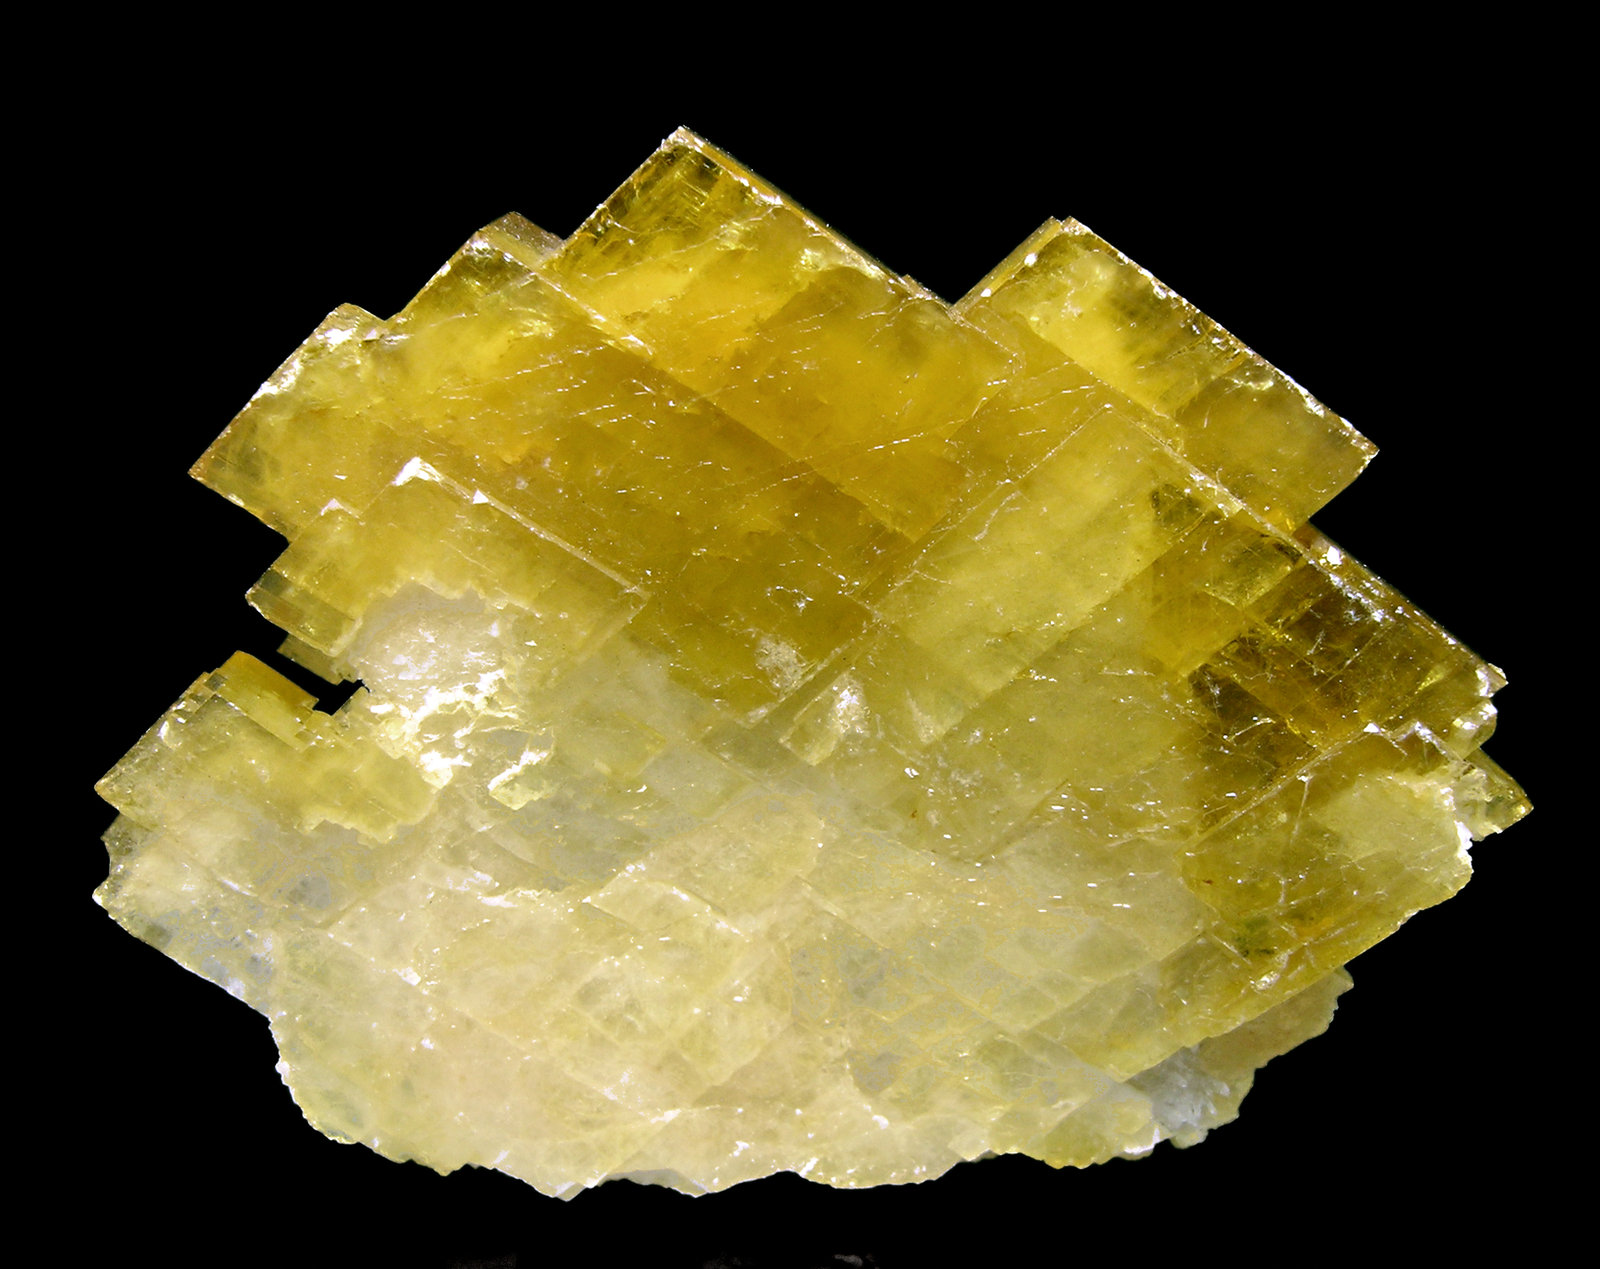 specimens/s_imagesM8/Doubly_terminated_Barite-KH86M8f.jpg